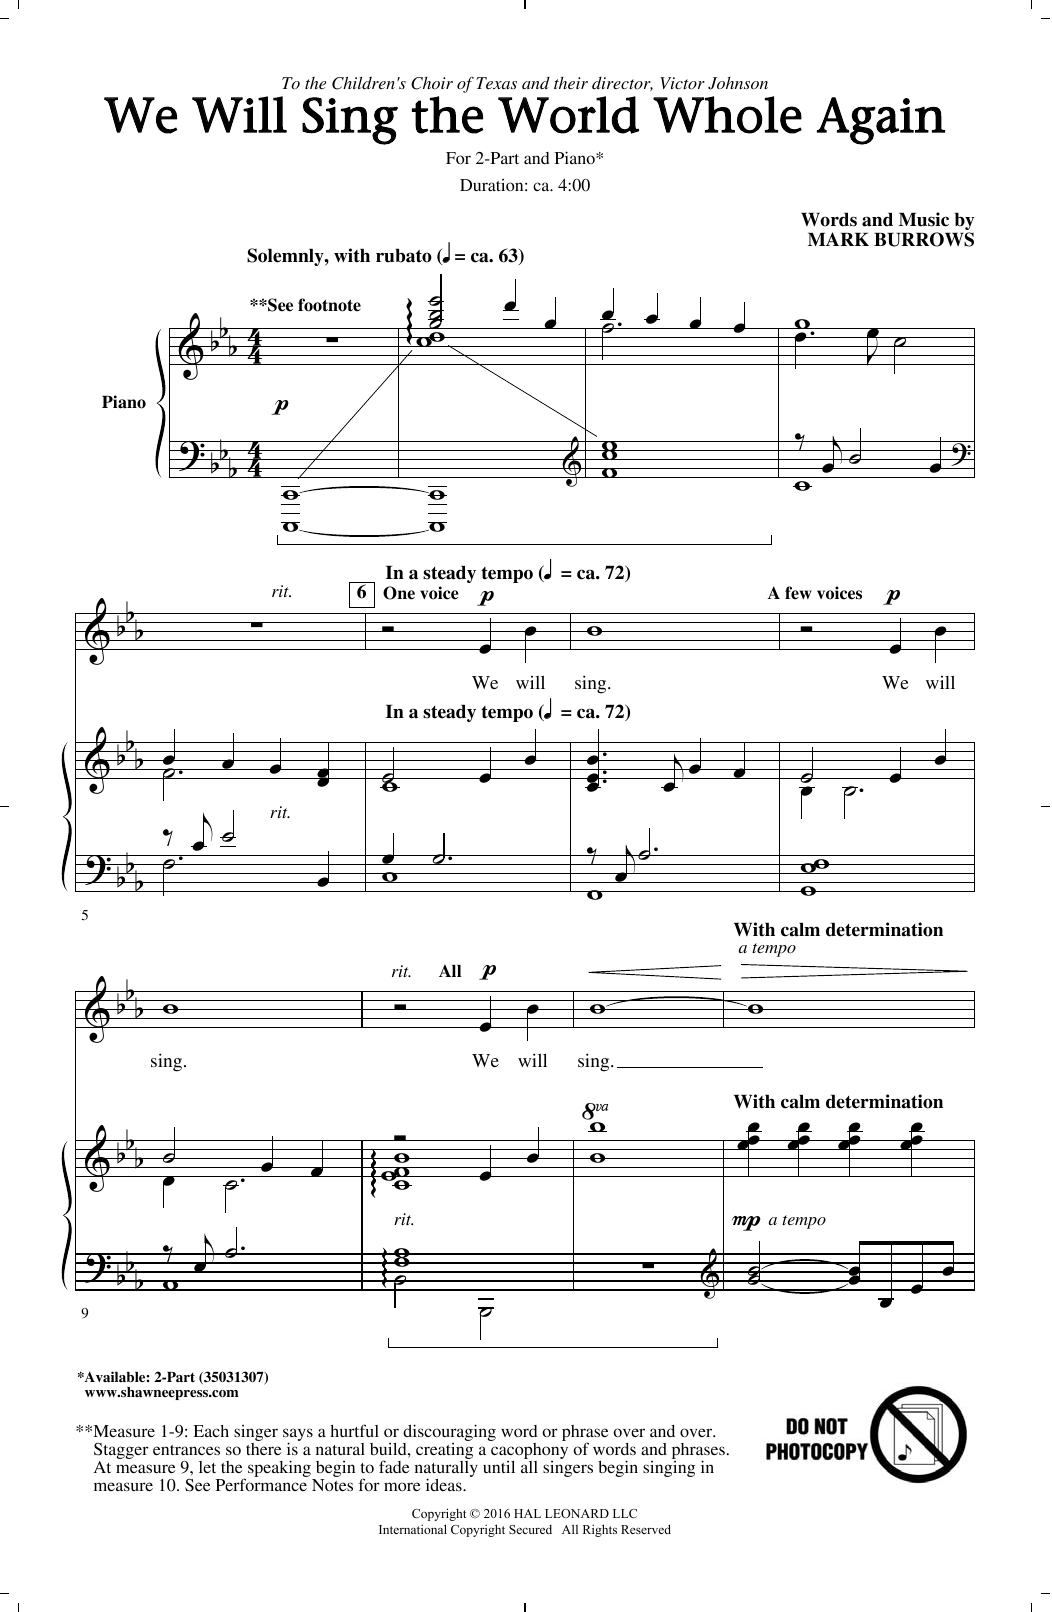 Download Mark Burrows We Will Sing The World Whole Again Sheet Music